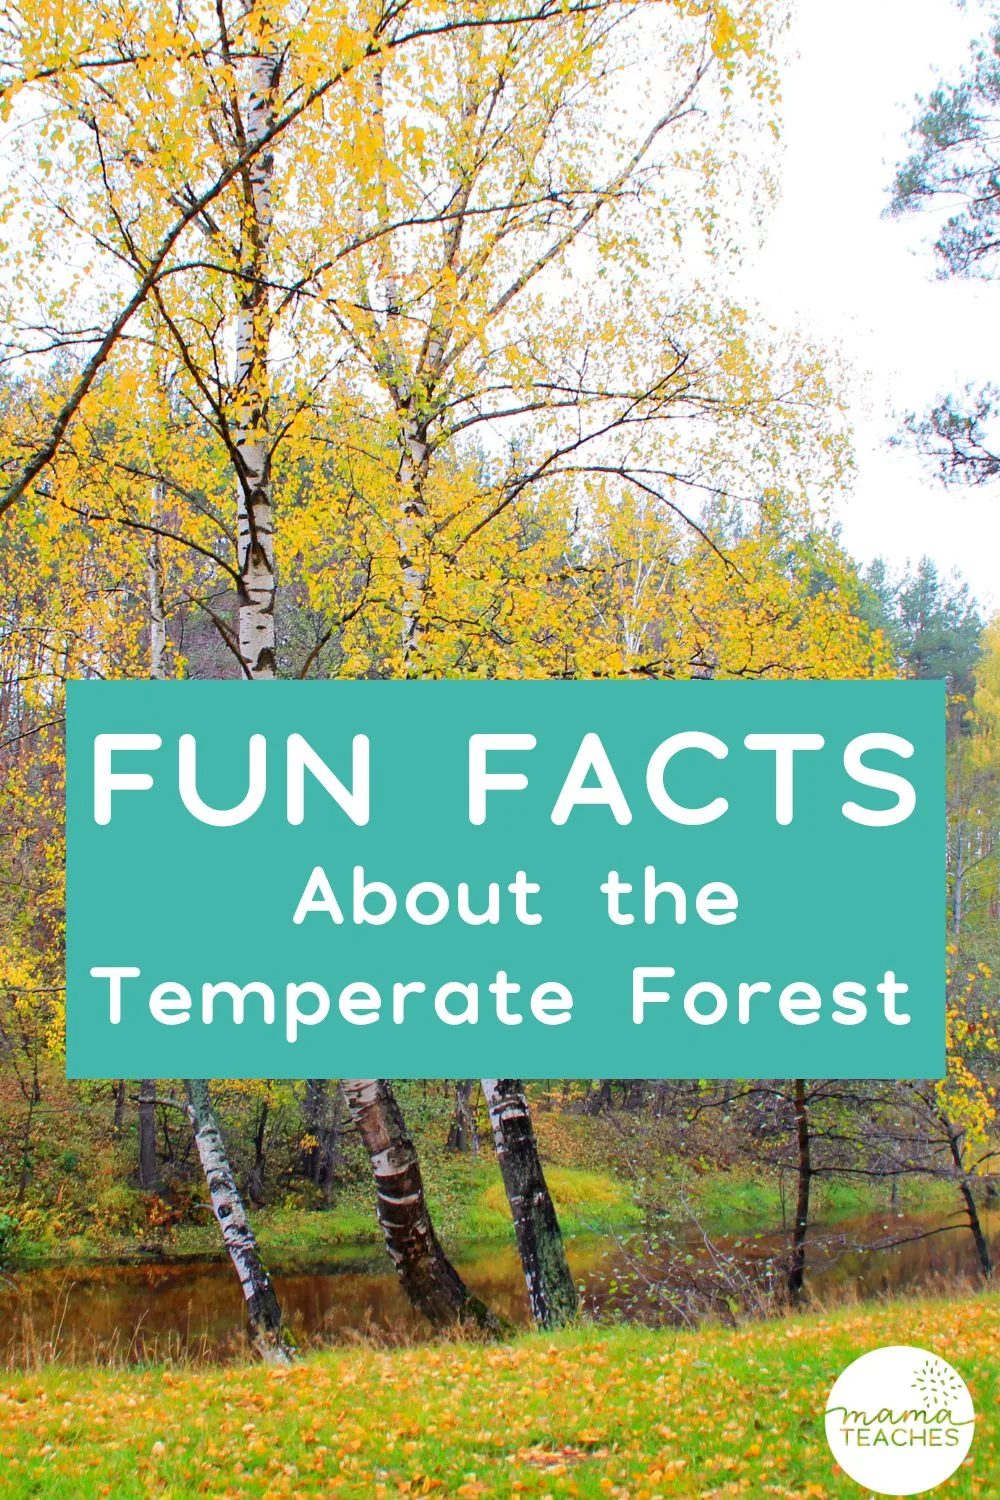 Fun Facts About the Temperate Forest